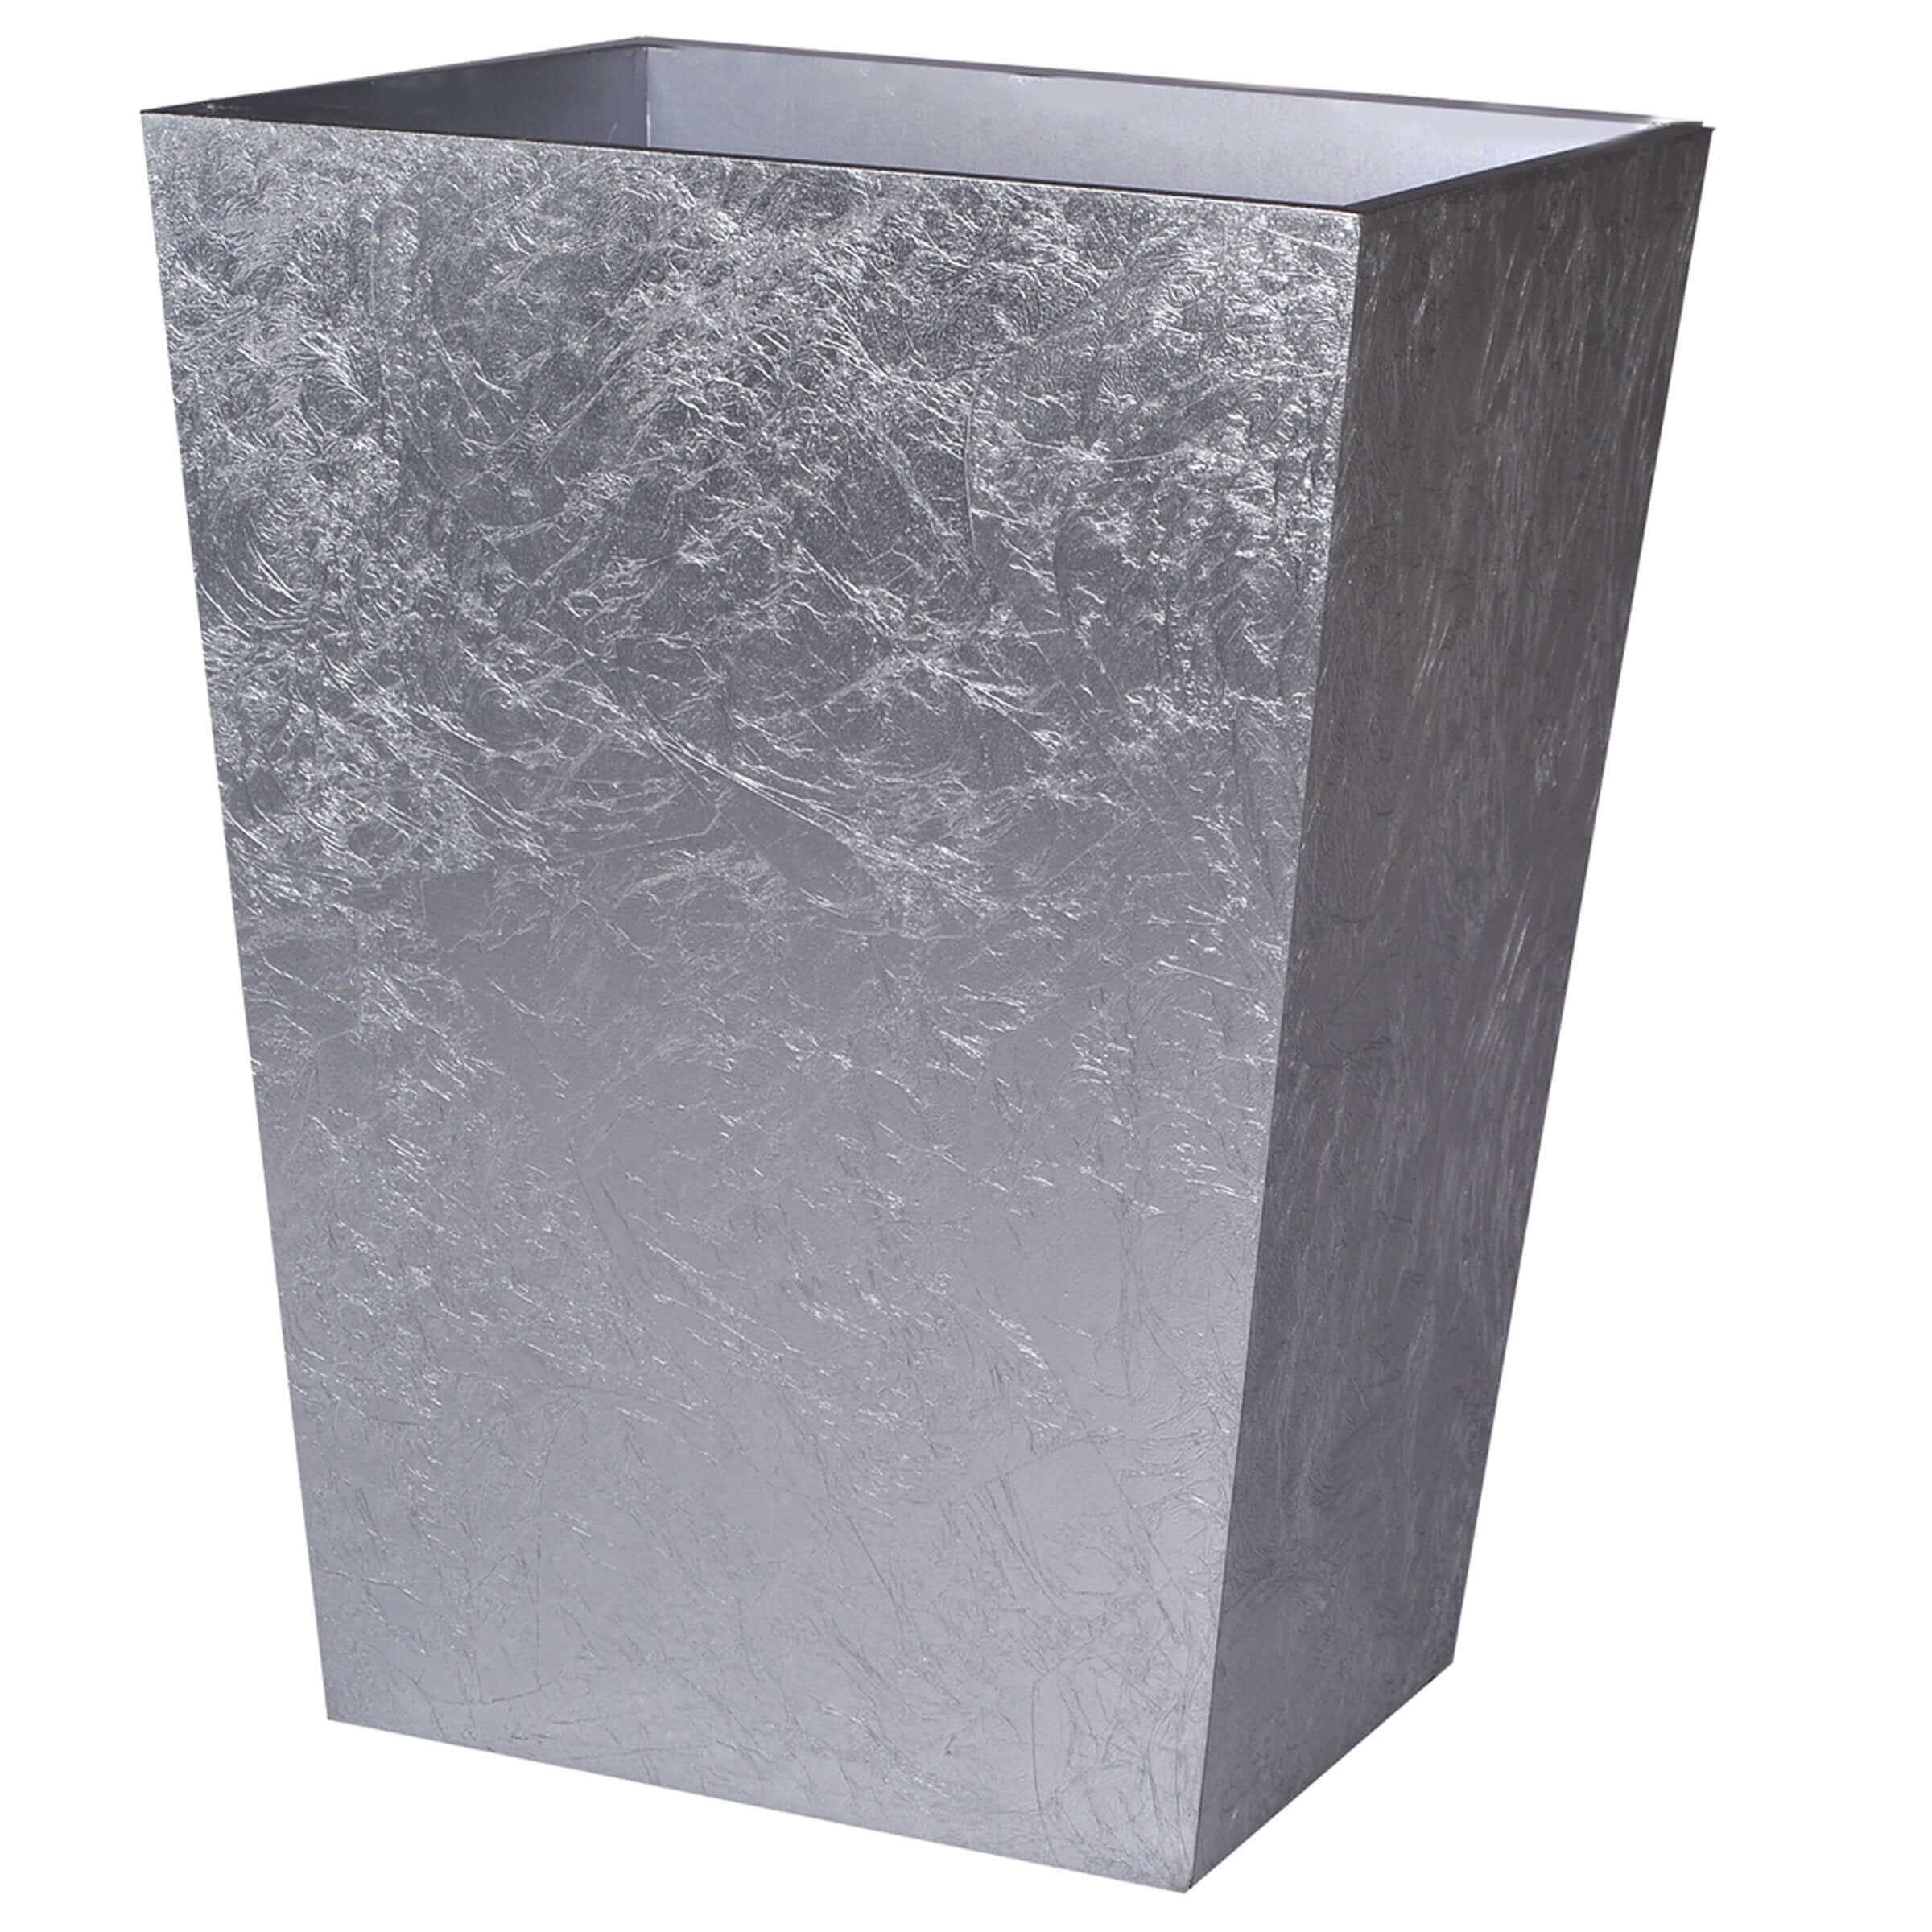 Mike + Ally - EOS Silver Straight Wastebasket - 32061S - Silver - 